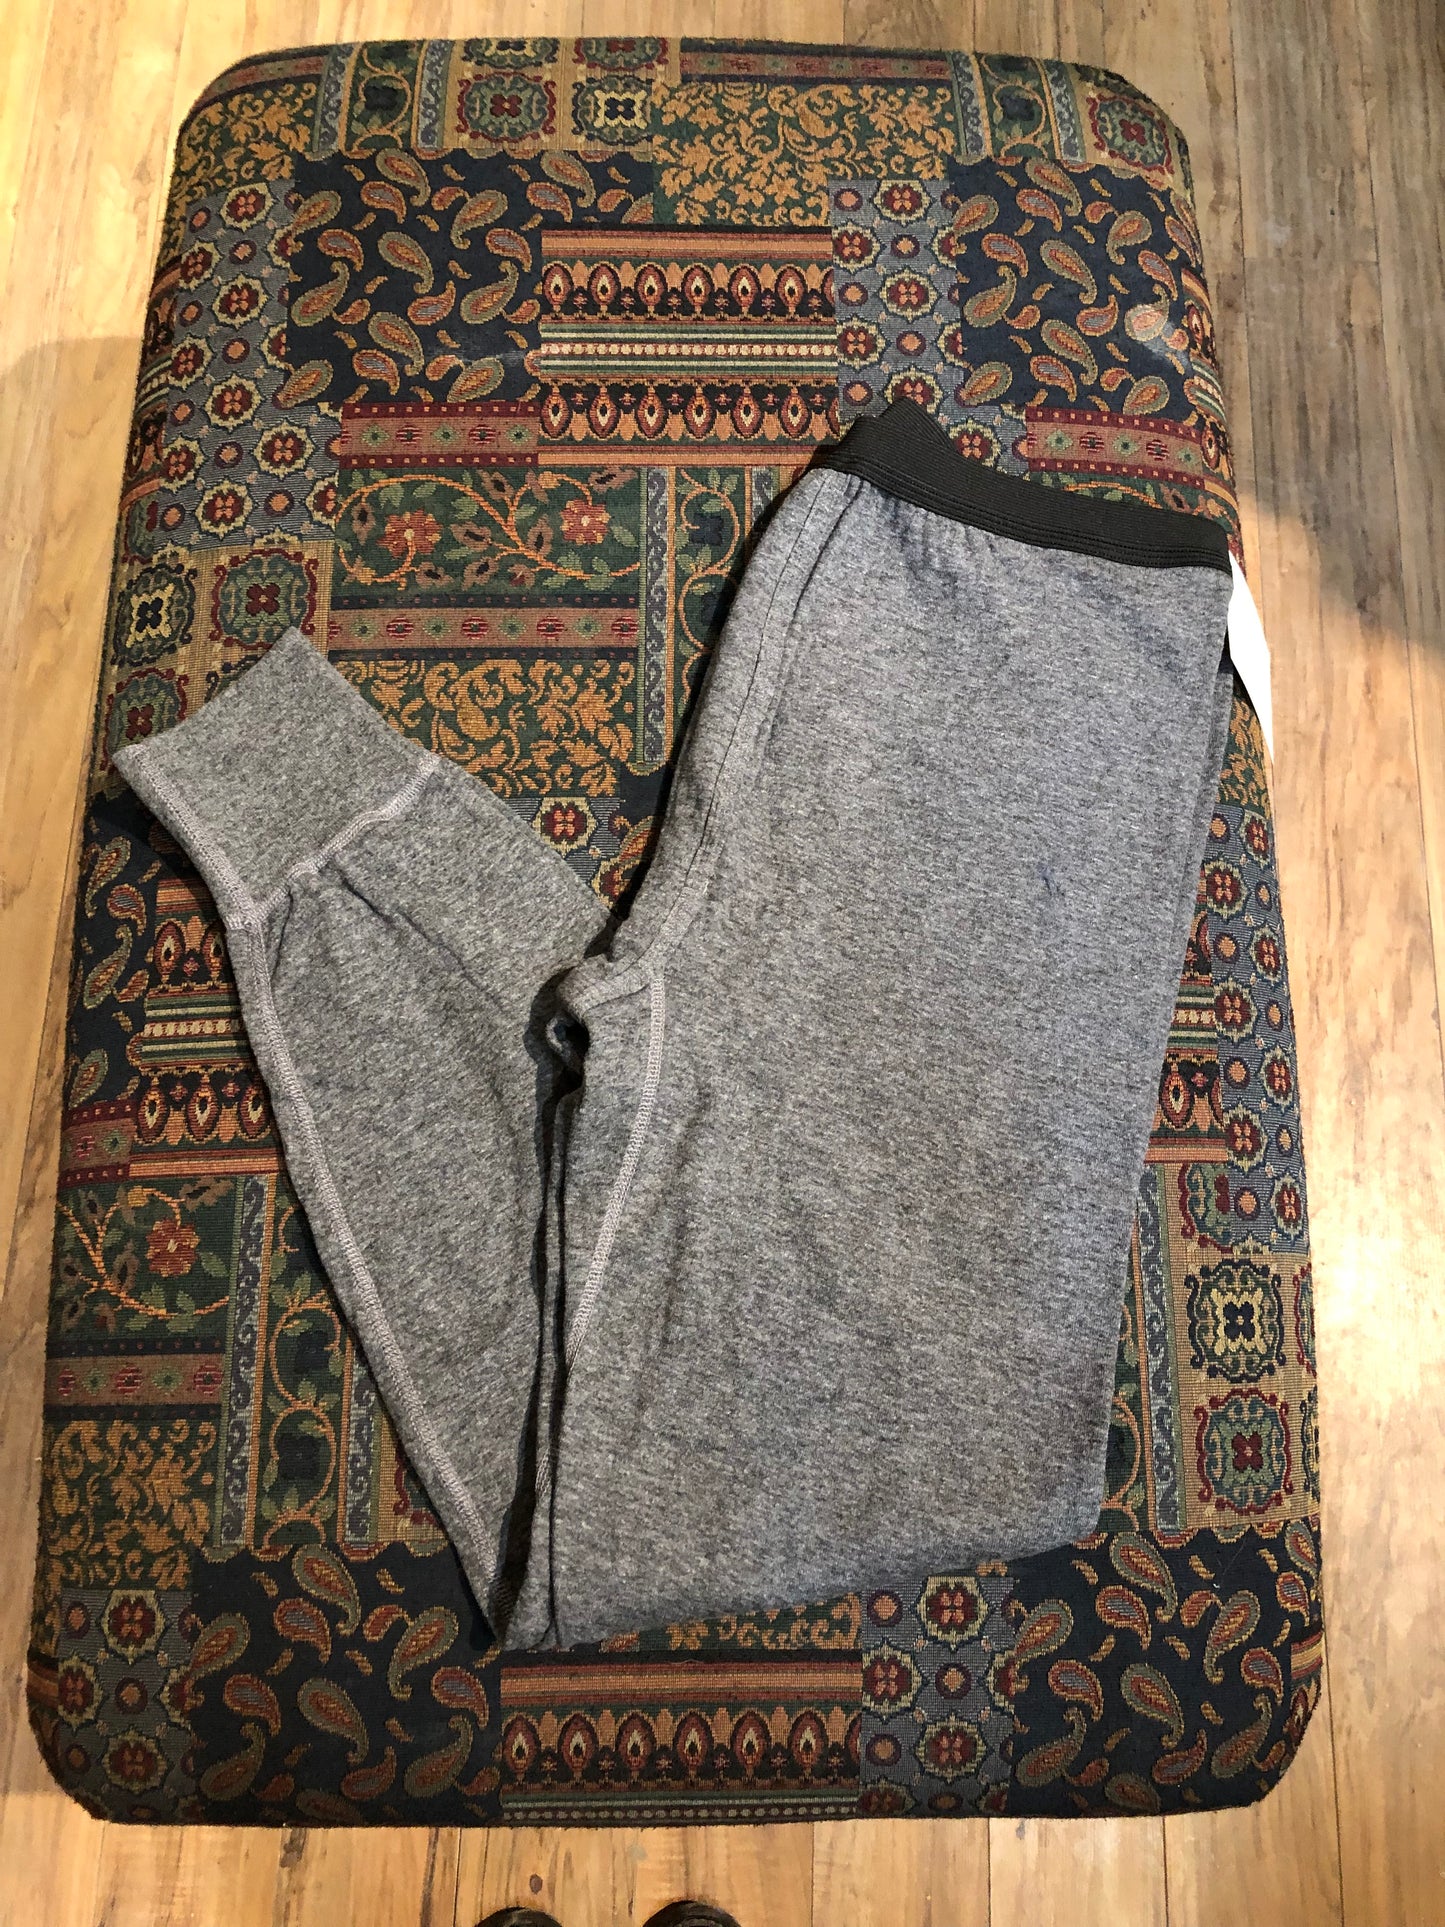 Kingspier Vintage - Stanfield''s deadstock duofold / layered jersey knit long underwear.
Made in Nova Scotia, Canada.